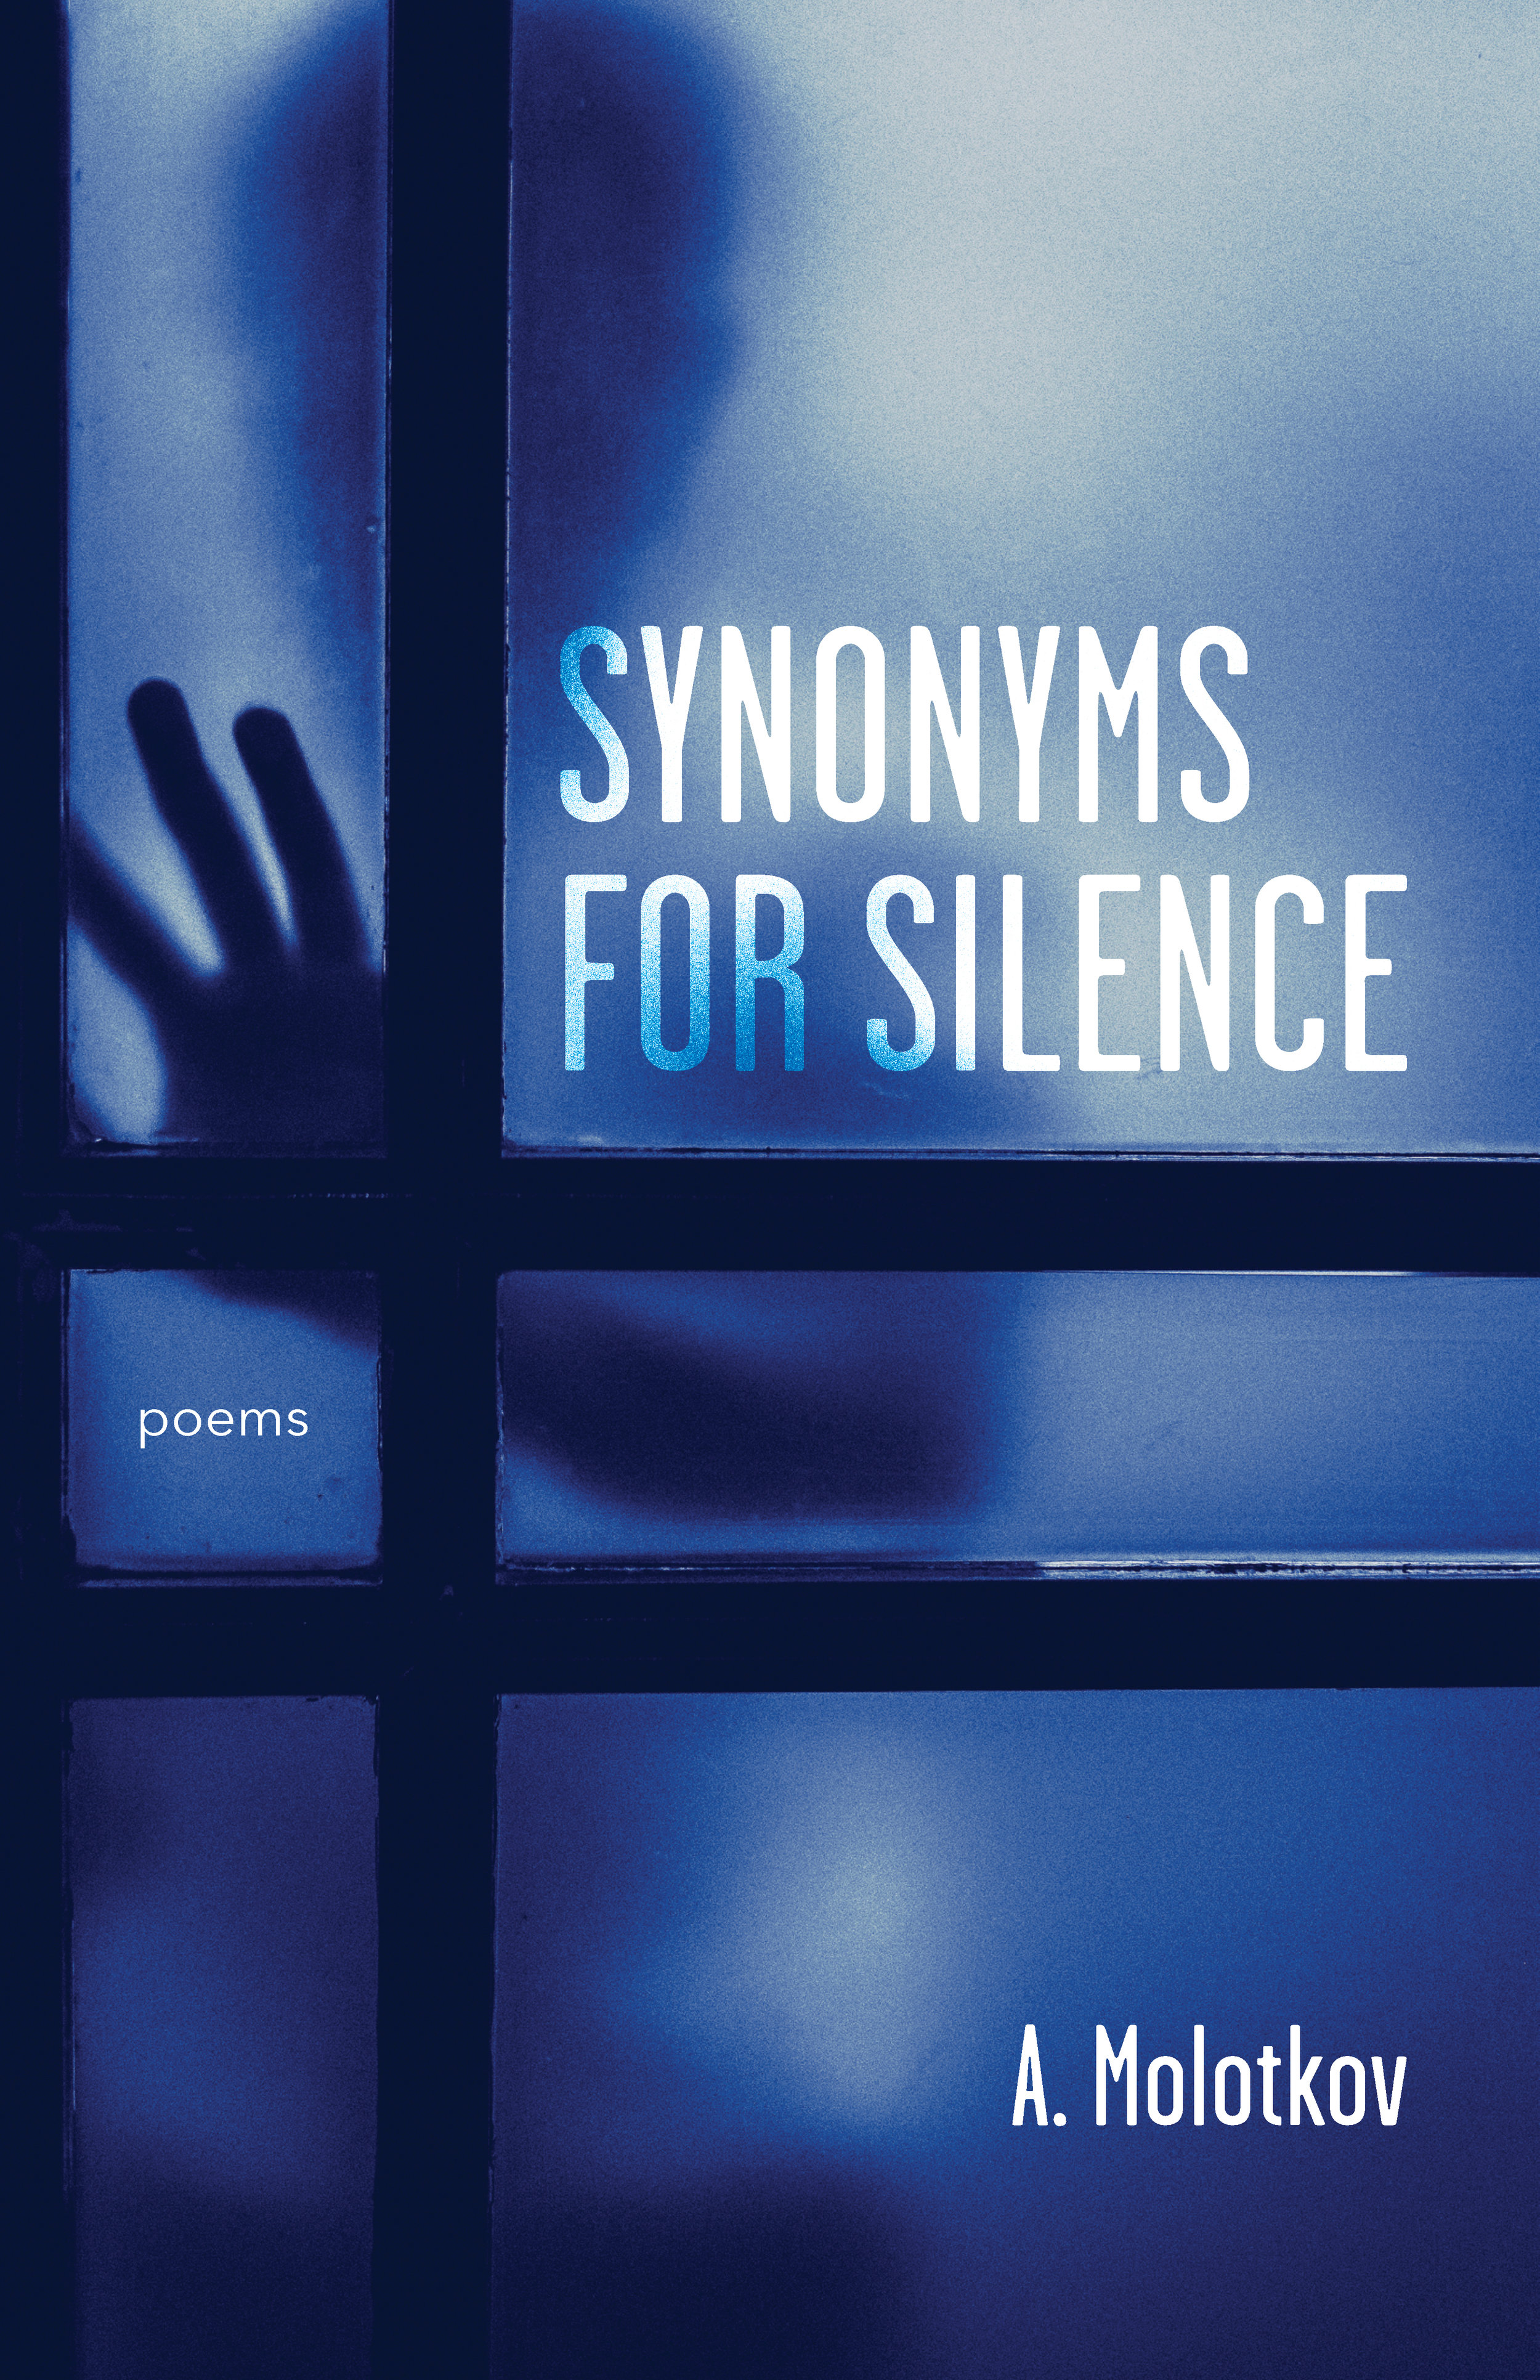 Synonyms for Silence Cover.jpg